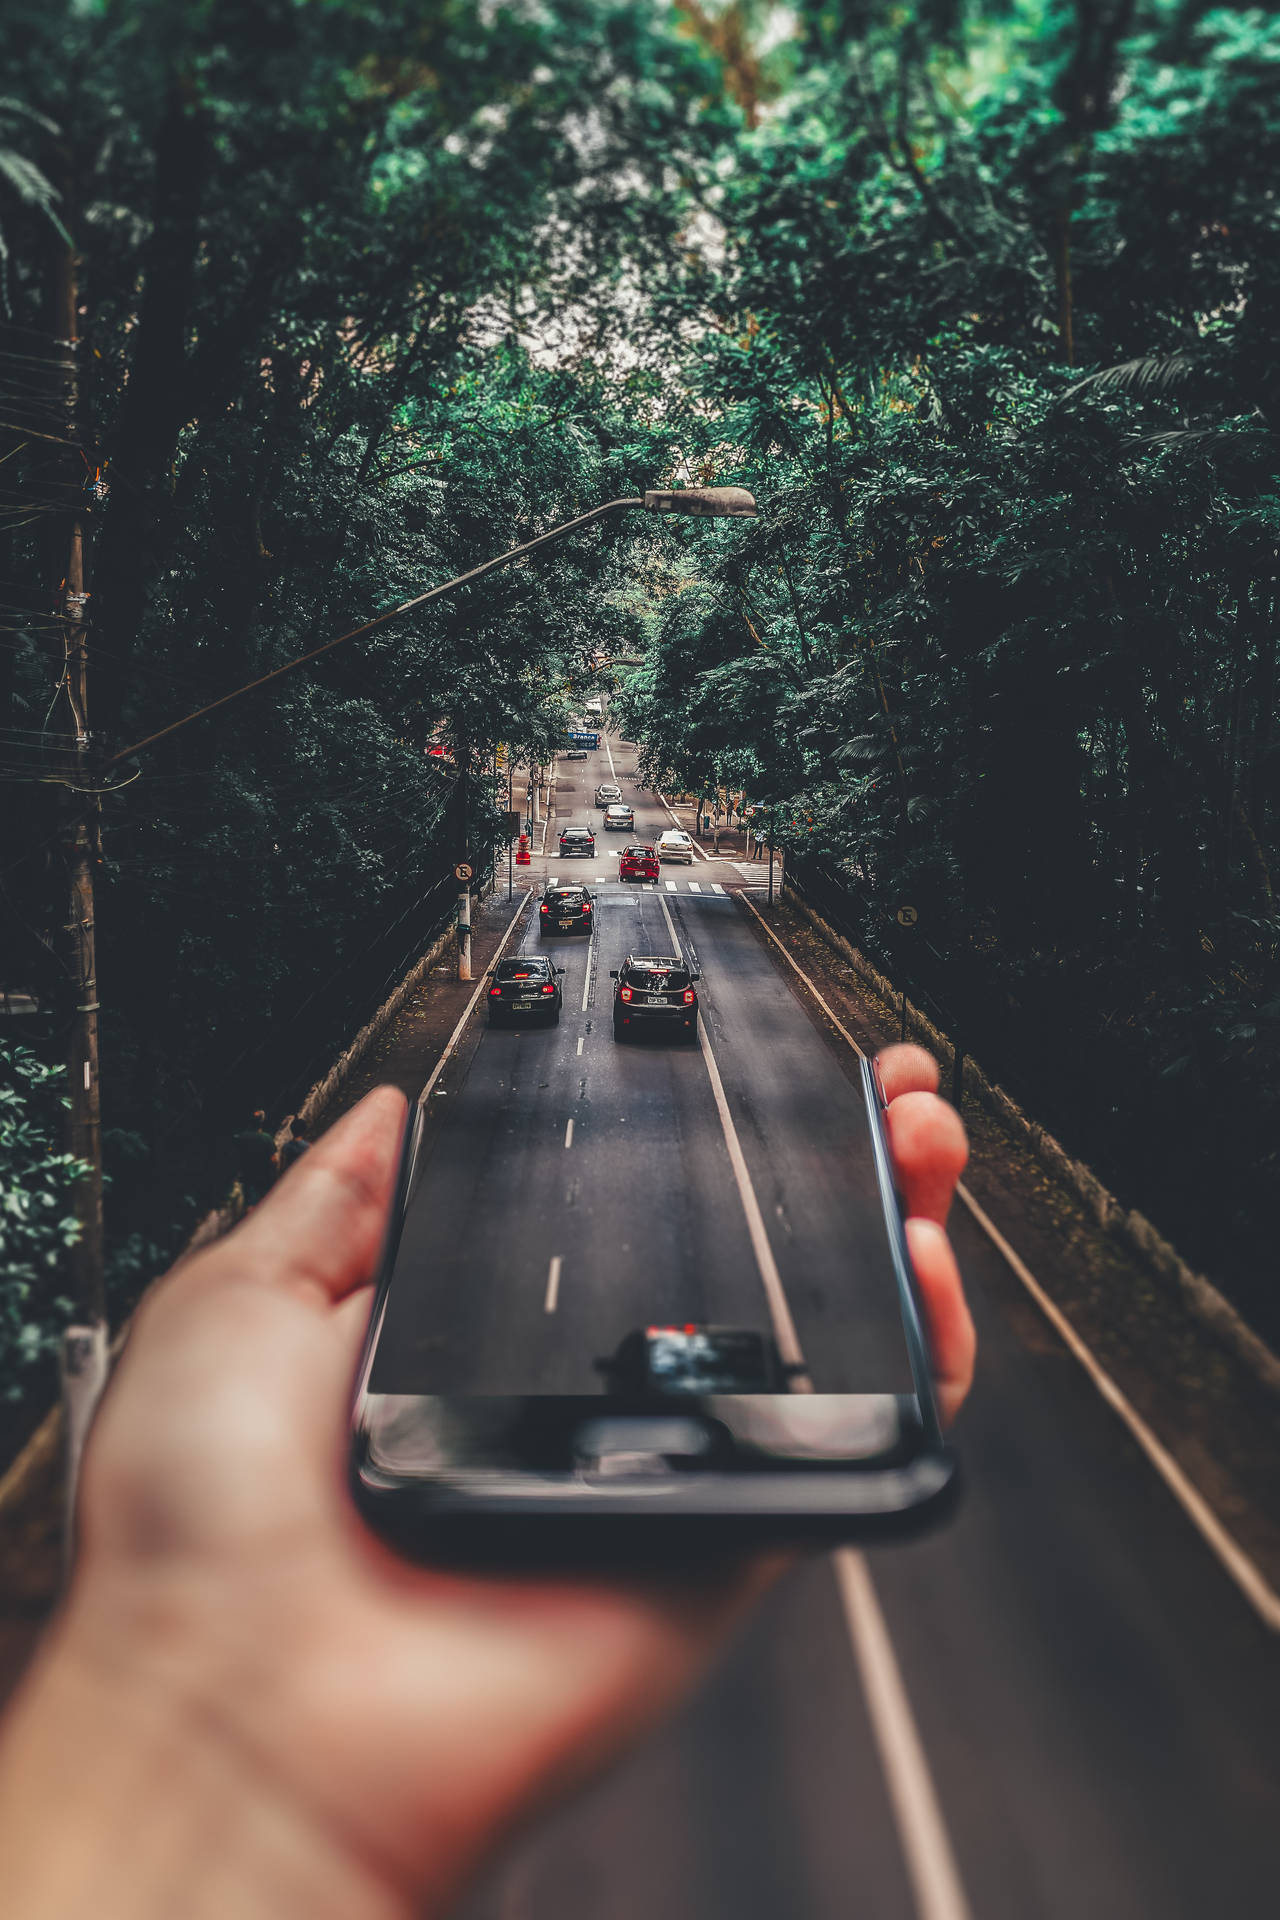 Mobile Cars On Road Background